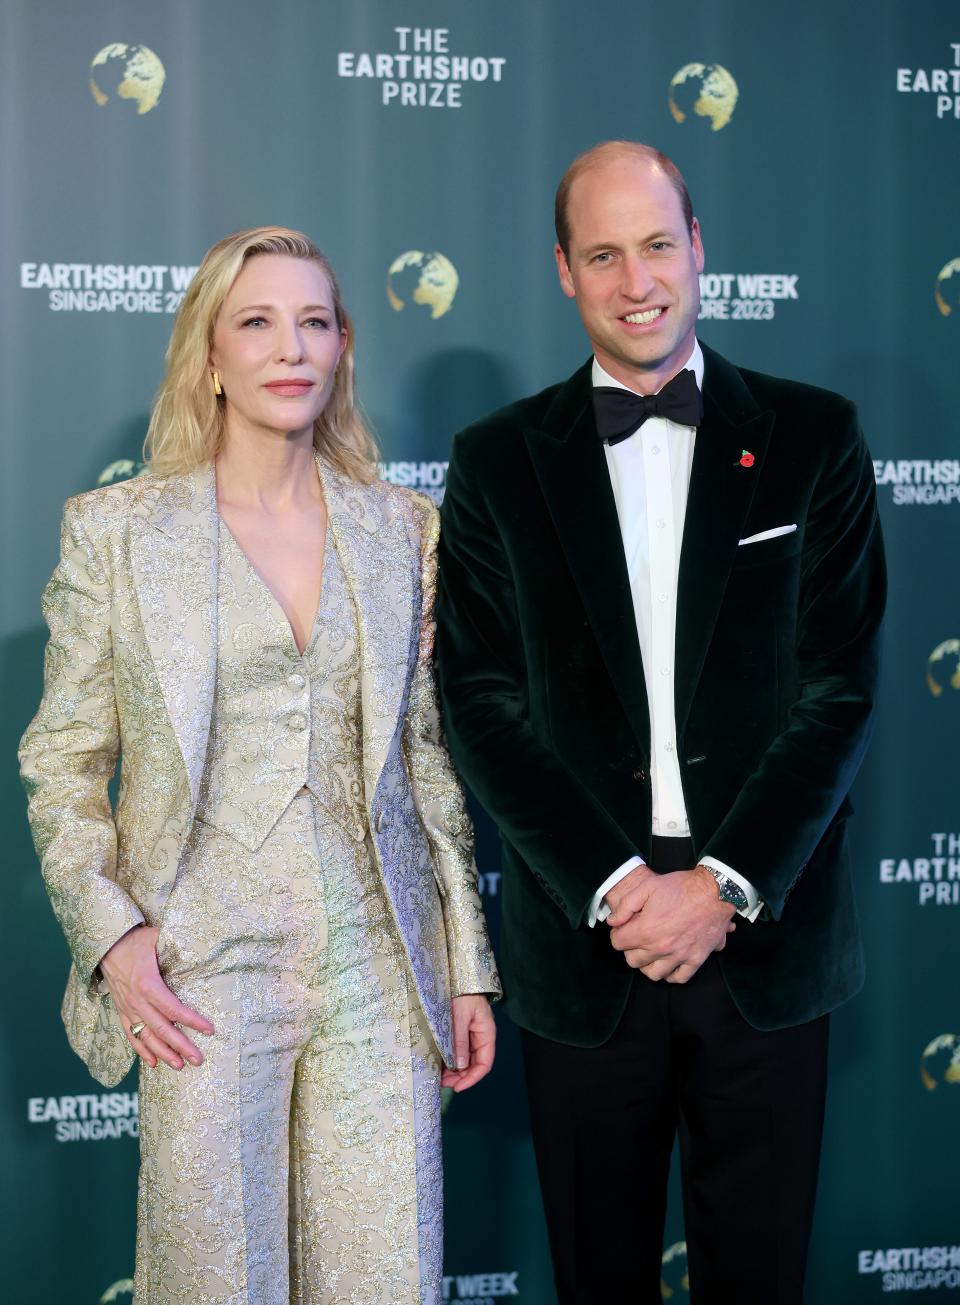 Cate Blanchett joined Prince William at the 2023 Earthshot Prize Awards Ceremony.